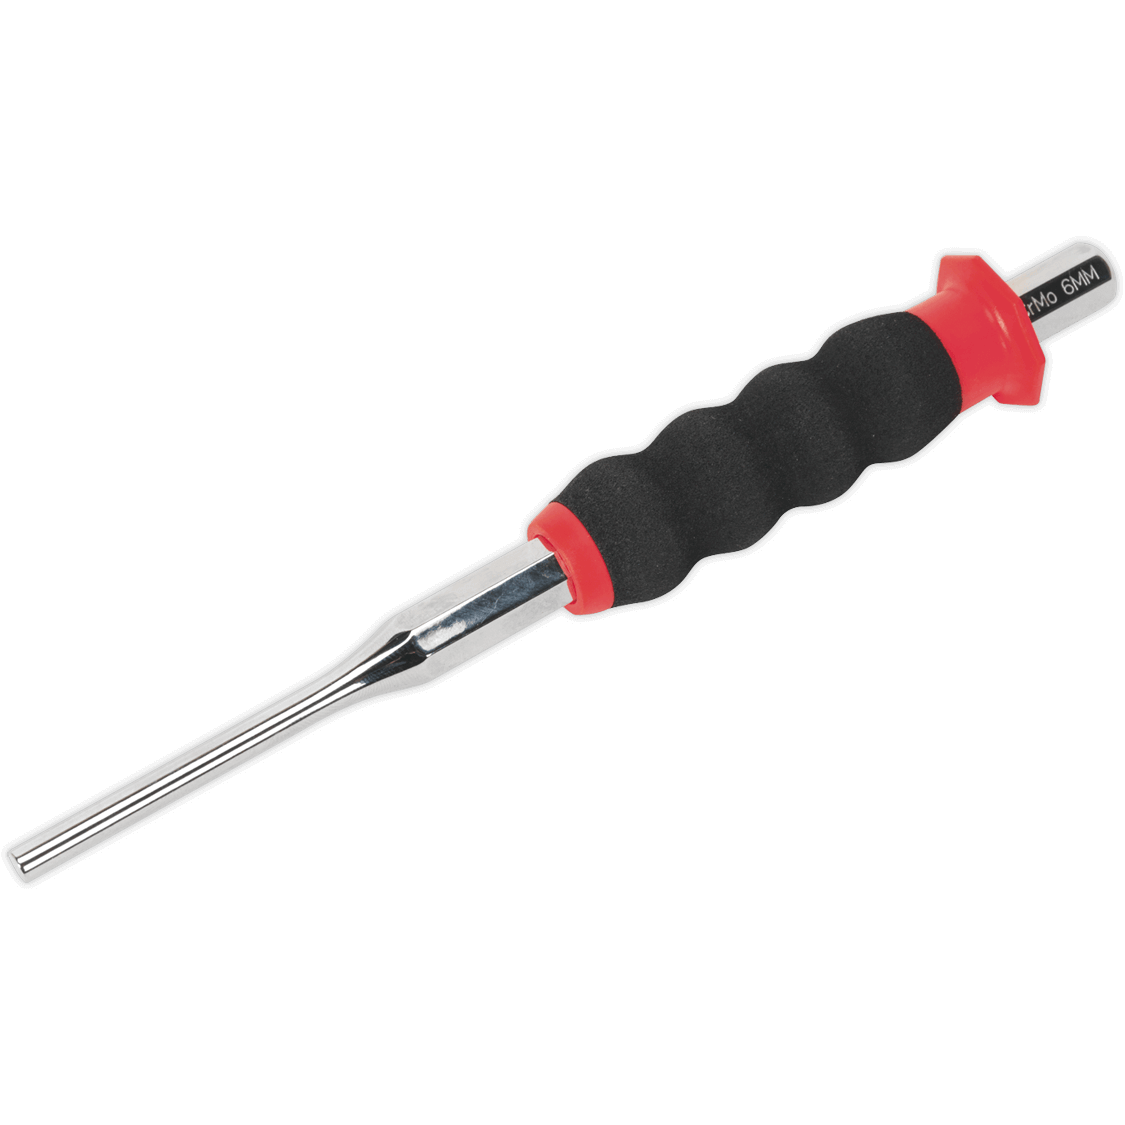 Photos - Other Hand Tools Sealey Sheathed Parallel Pin Punch 6mm AK91316 